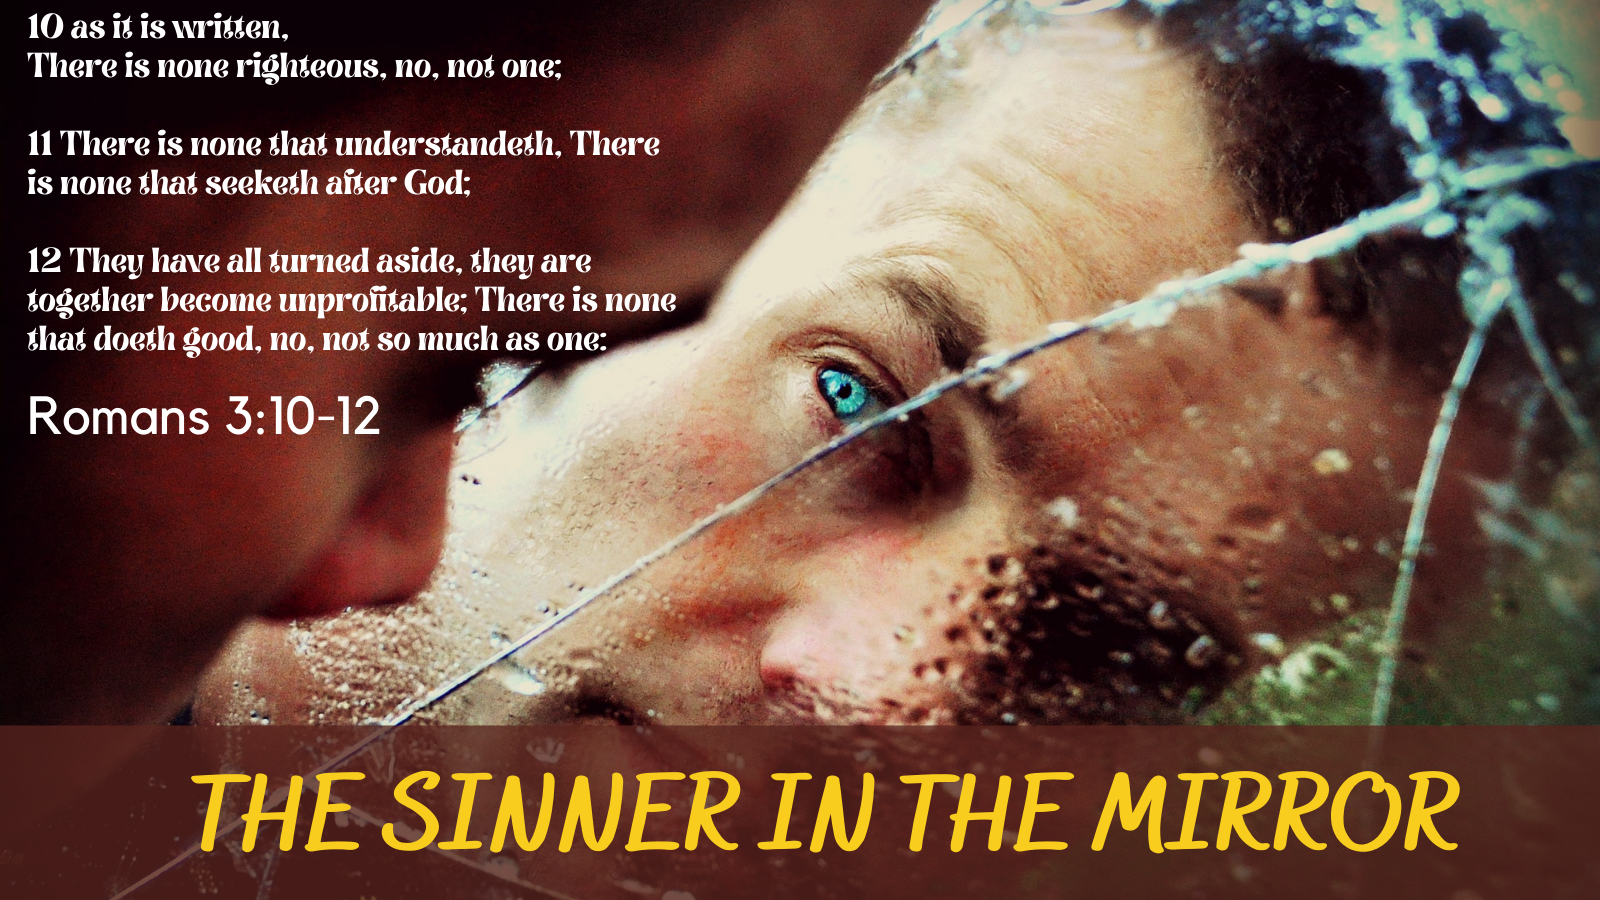 The sinner in the mirror home page featured image. 